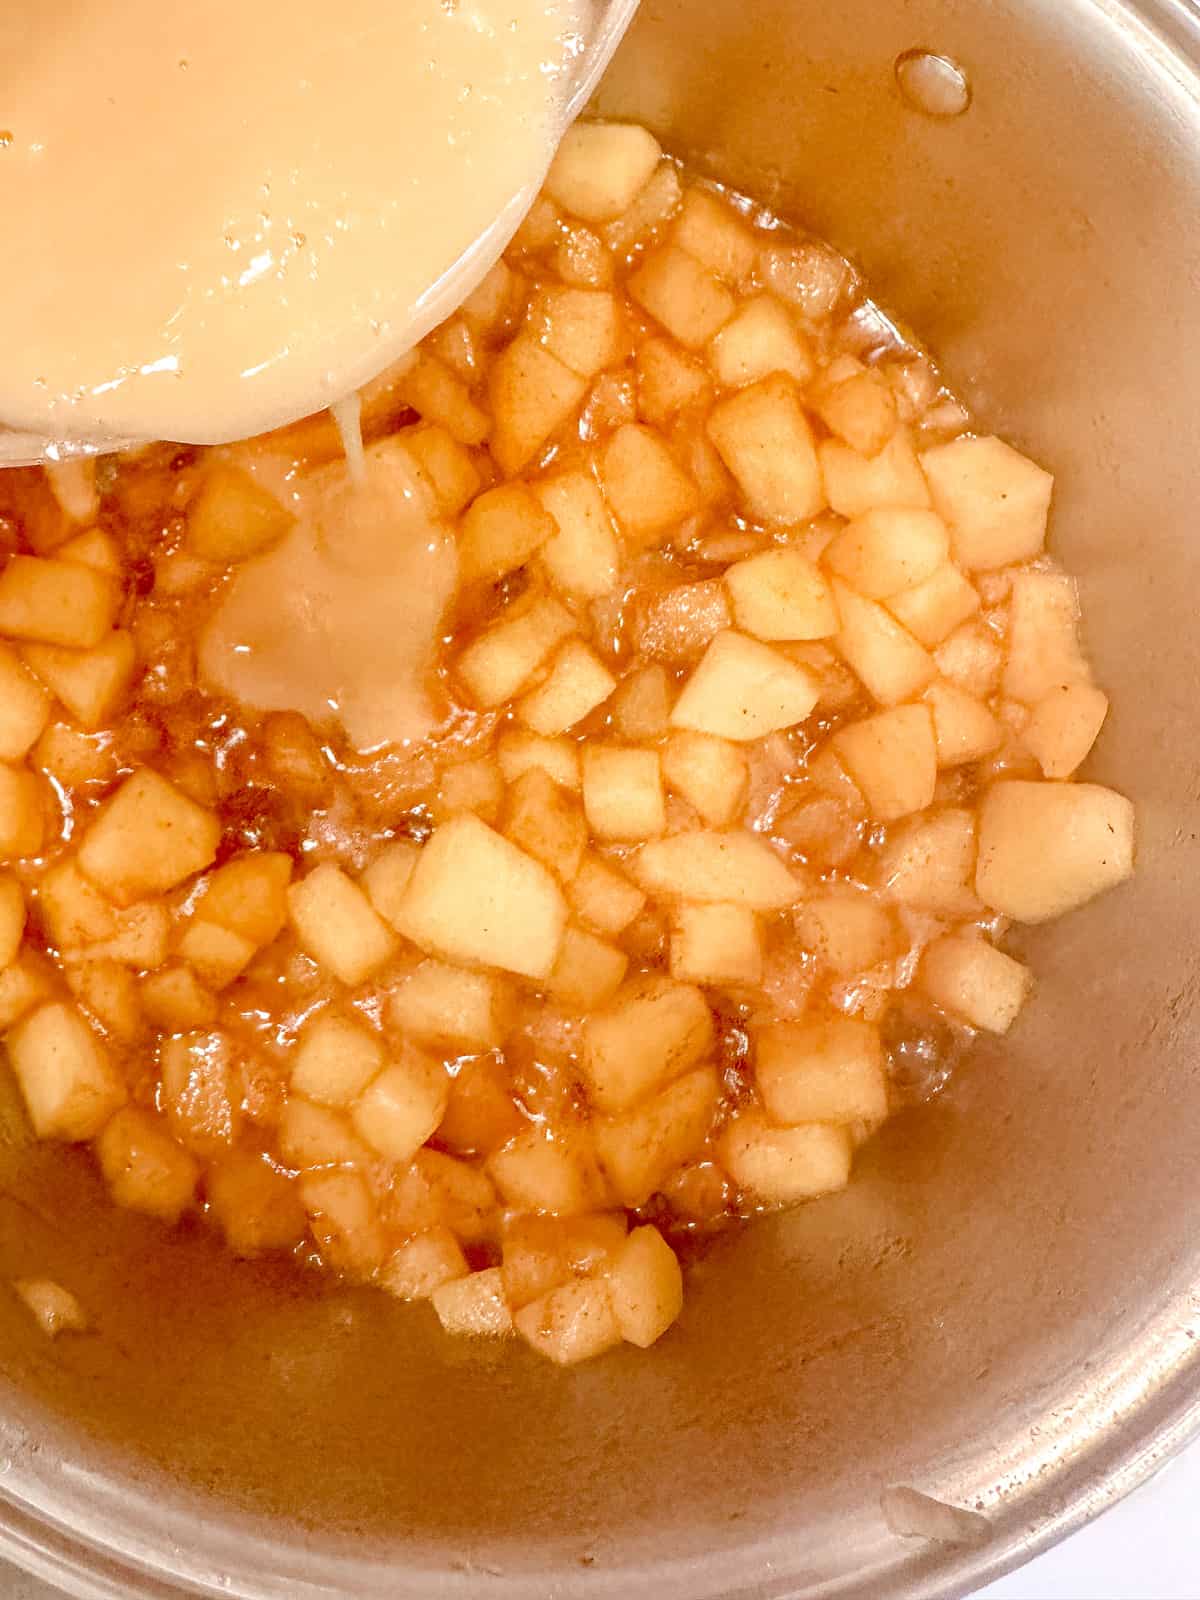 Drizzling a slurry of cornstarch and maple syrup into cooked apples.